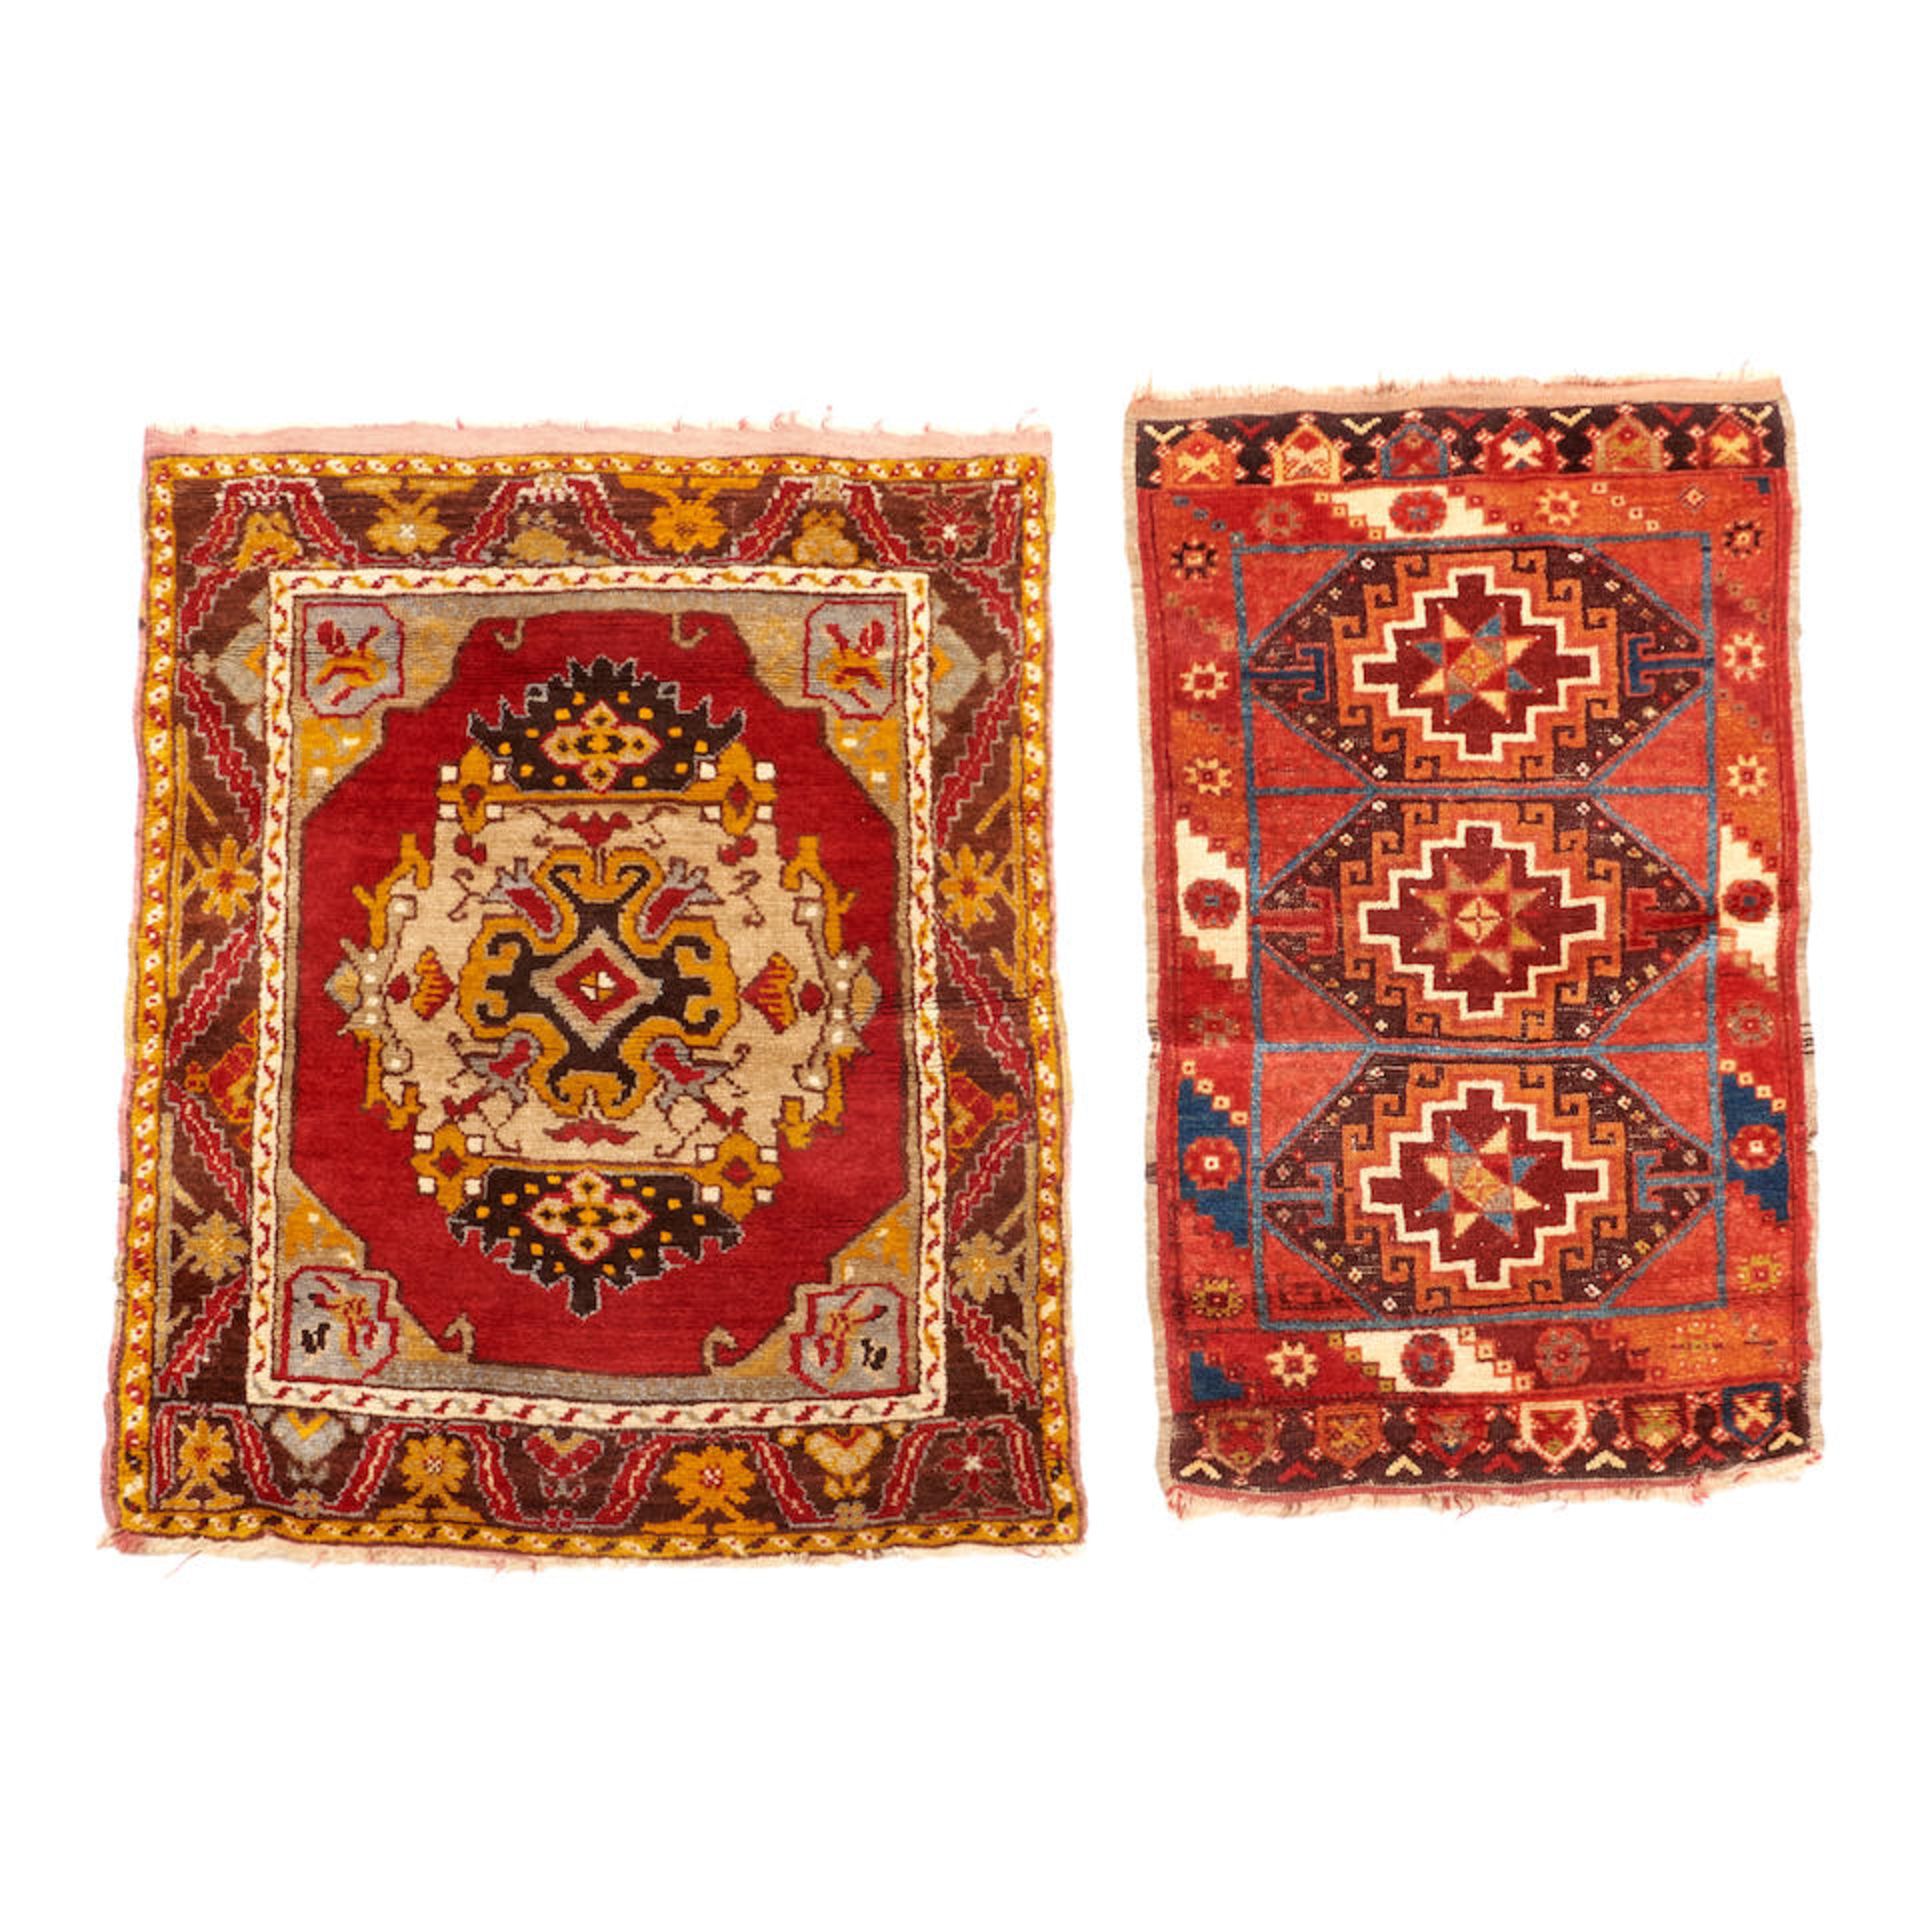 Two Anatolian Rugs Anatolia 2 ft. 8 in. x 3 ft. 3 in. and 1 ft. 11 in. x 3 ft. 3 in.